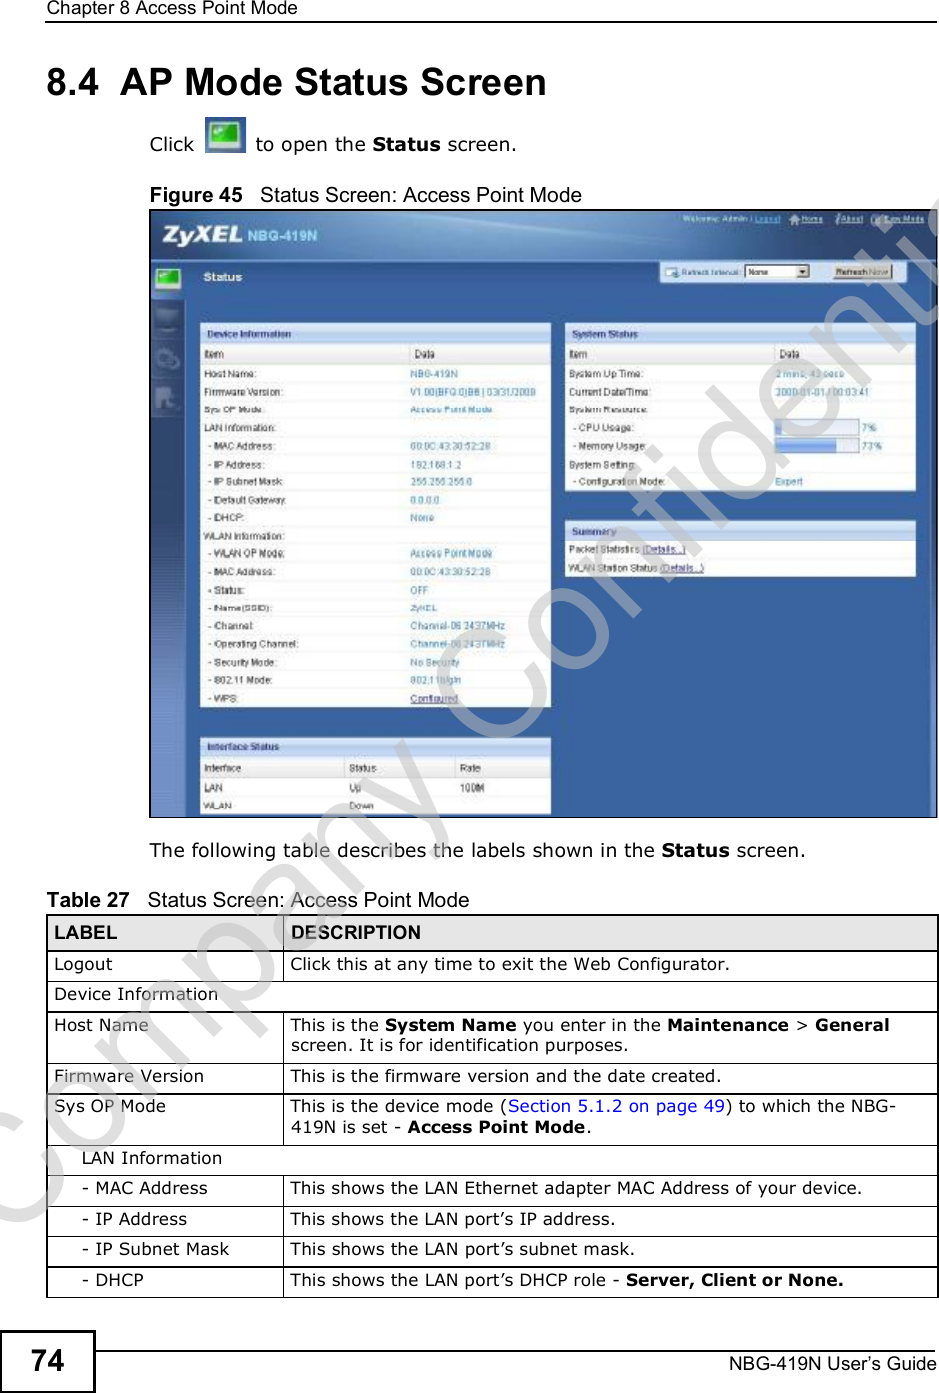 Chapter 8Access Point ModeNBG-419N User s Guide748.4  AP Mode Status ScreenClick  to open the Status screen. Figure 45   Status Screen: Access Point Mode The following table describes the labels shown in the Status screen.Table 27   Status Screen: Access Point Mode LABEL DESCRIPTIONLogoutClick this at any time to exit the Web Configurator.Device InformationHost NameThis is the System Name you enter in the Maintenance &gt; General screen. It is for identification purposes.Firmware VersionThis is the firmware version and the date created. Sys OP ModeThis is the device mode (Section 5.1.2 on page 49) to which the NBG-419N is set - Access Point Mode.LAN Information- MAC AddressThis shows the LAN Ethernet adapter MAC Address of your device.- IP AddressThis shows the LAN port!s IP address.- IP Subnet MaskThis shows the LAN port!s subnet mask.- DHCPThis shows the LAN port!s DHCP role - Server, Client or None.Company Confidential